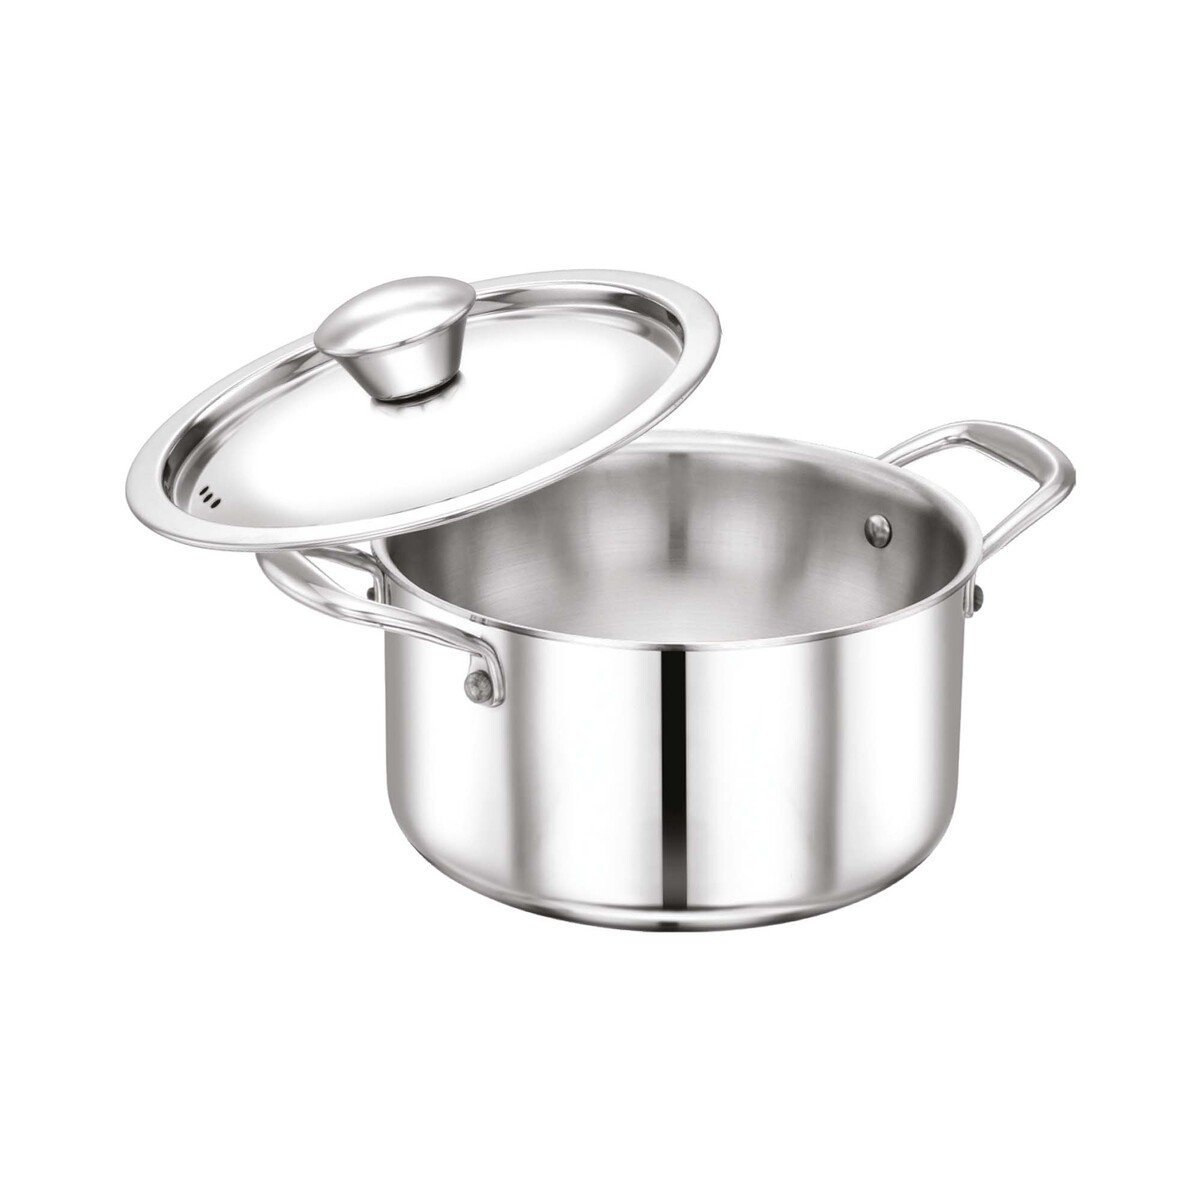 Chefline Stainless Steel Tri-Ply Dutch Oven INDRI 24cm